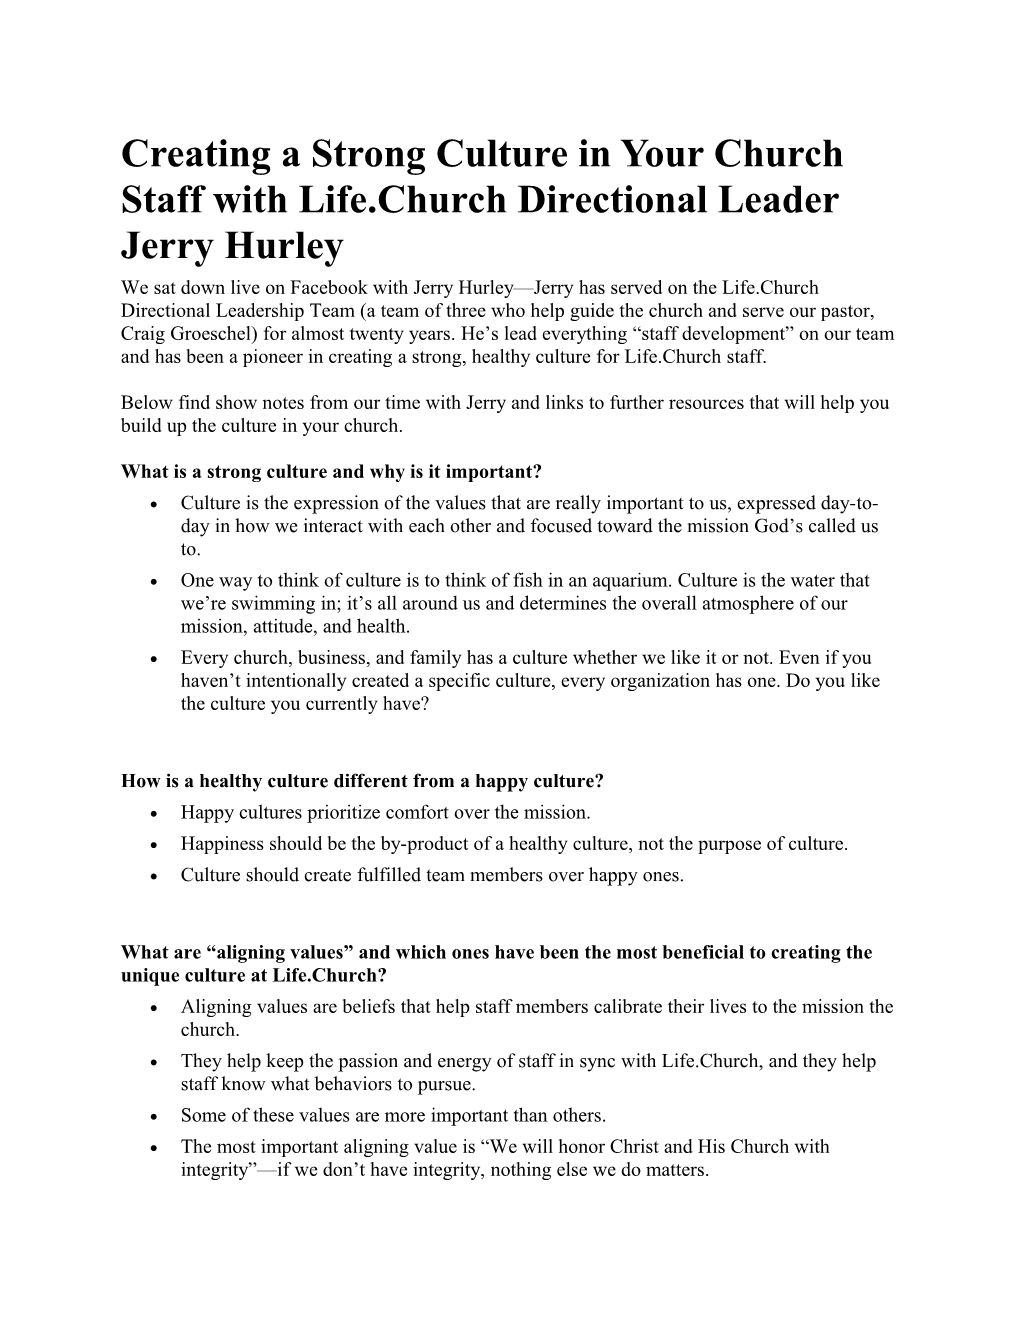 Creating a Strong Culture in Your Church Staff with Life.Church Directional Leader Jerry